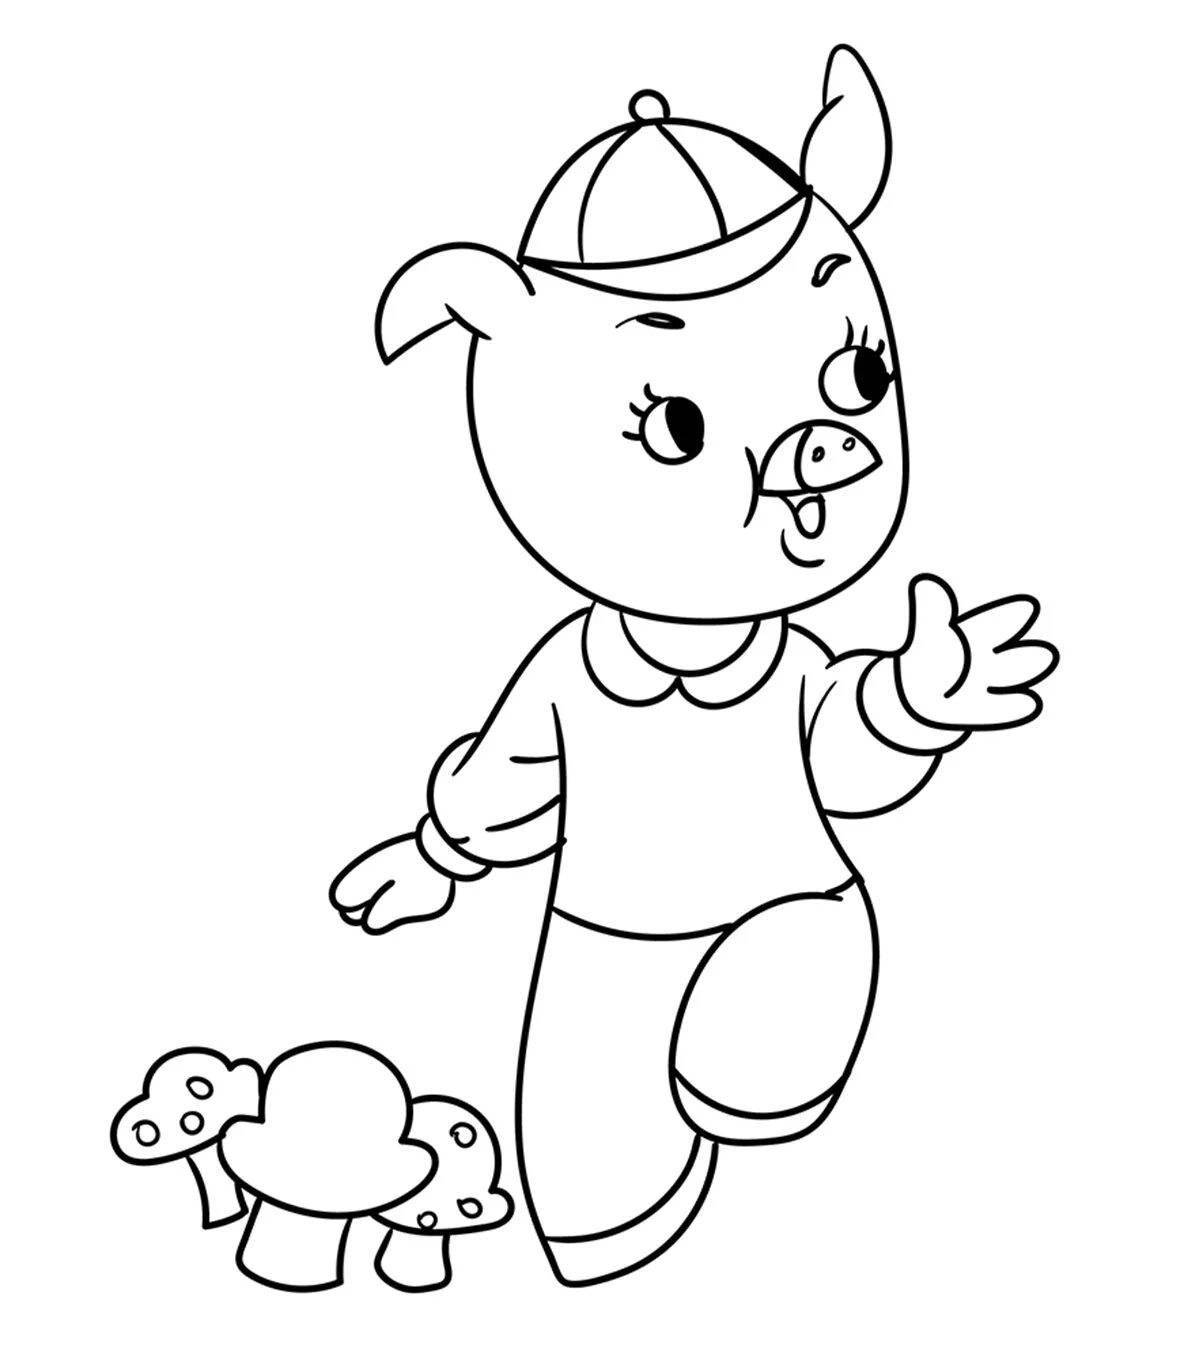 Colorful coloring 3 pigs for children 3-4 years old